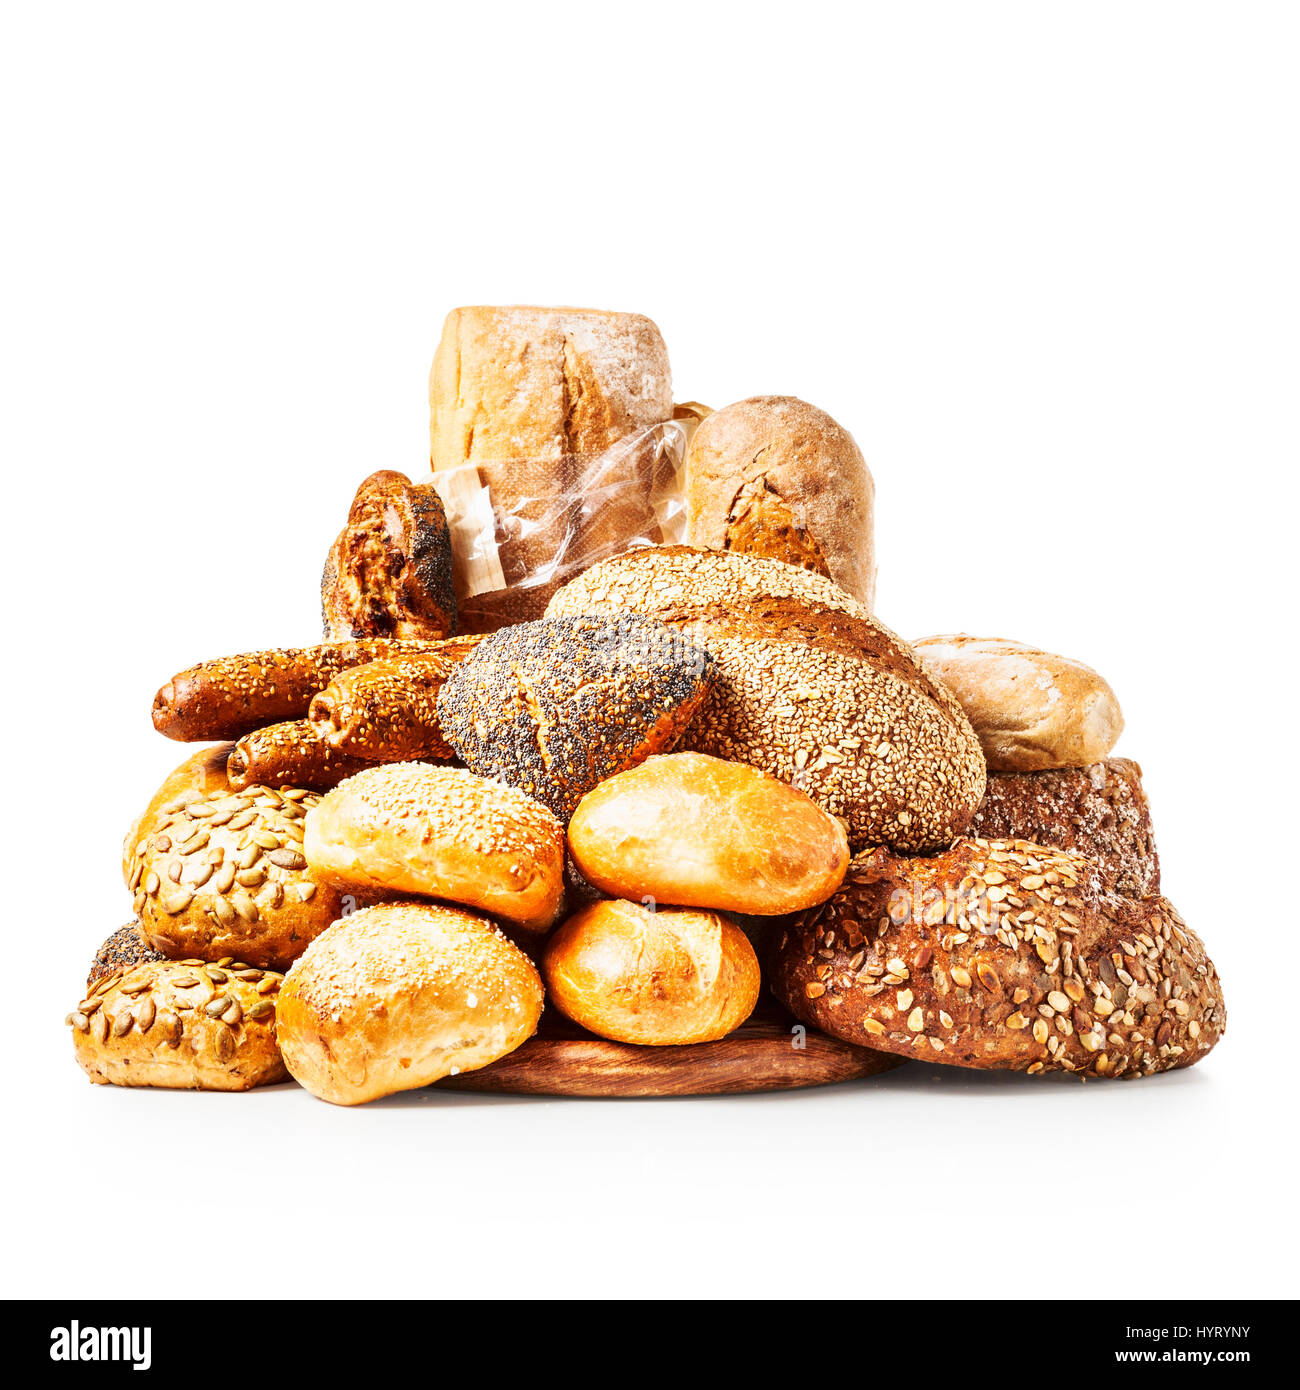 Different fresh bread rolls and buns pile isolated on white background clipping path included Stock Photo